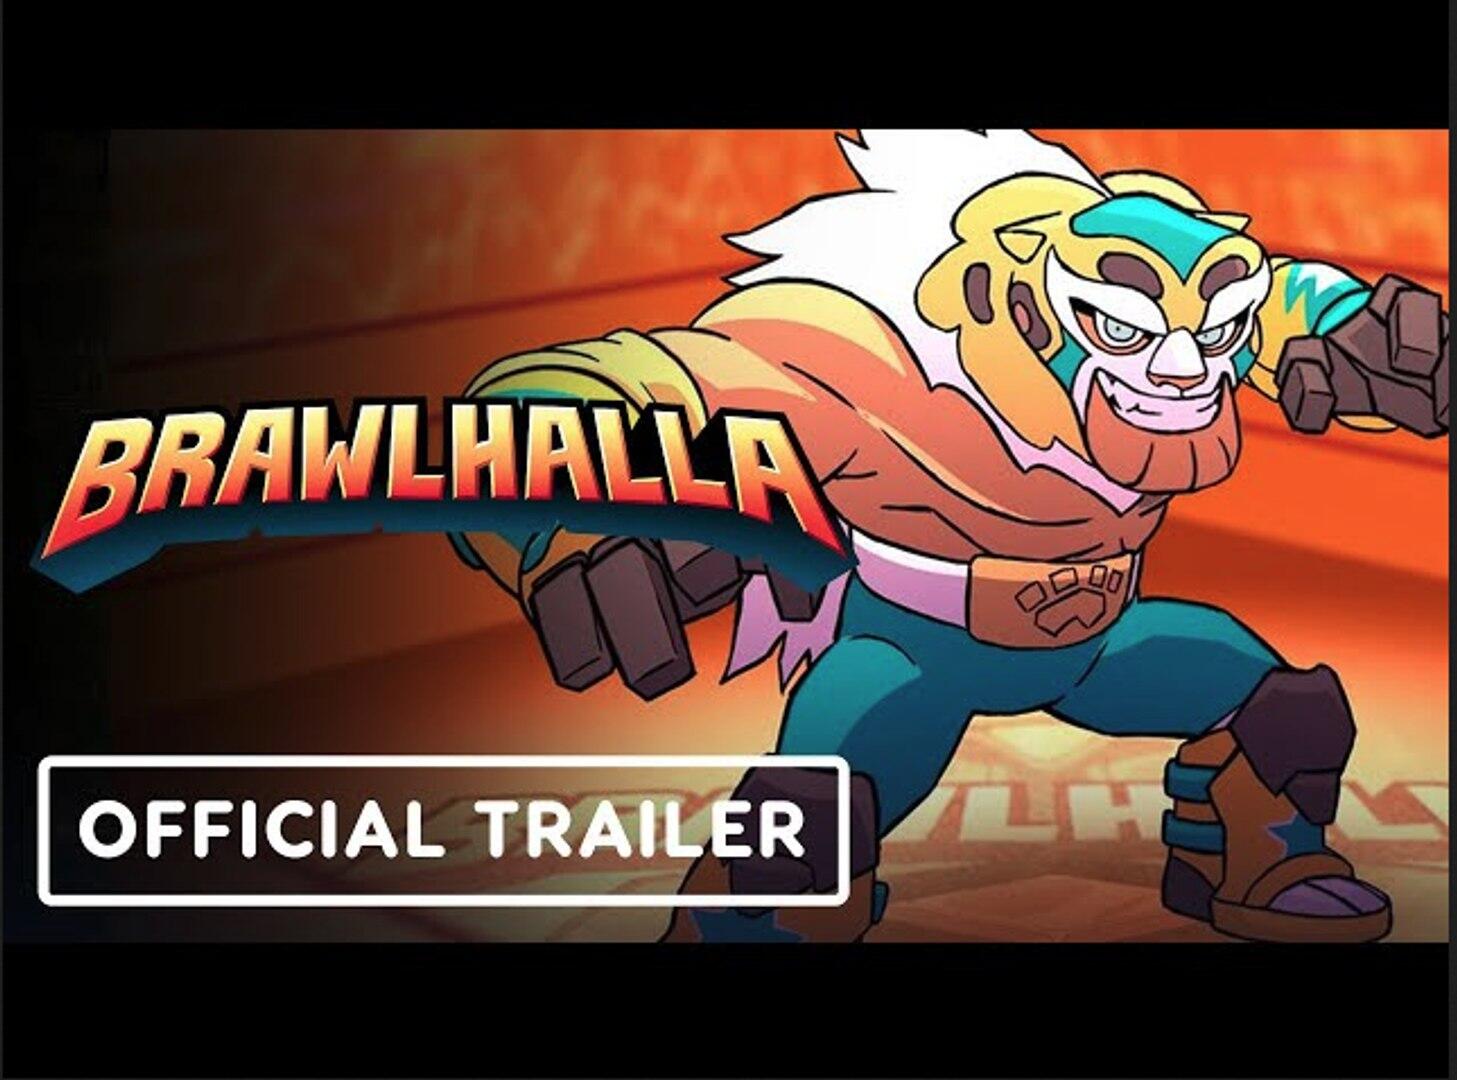 Astro duel 2. Brawlhalla Gameplay. Battle Boots Brawlhalla. Tezca Brawlhalla. Tezca Brawlhalla PNG.